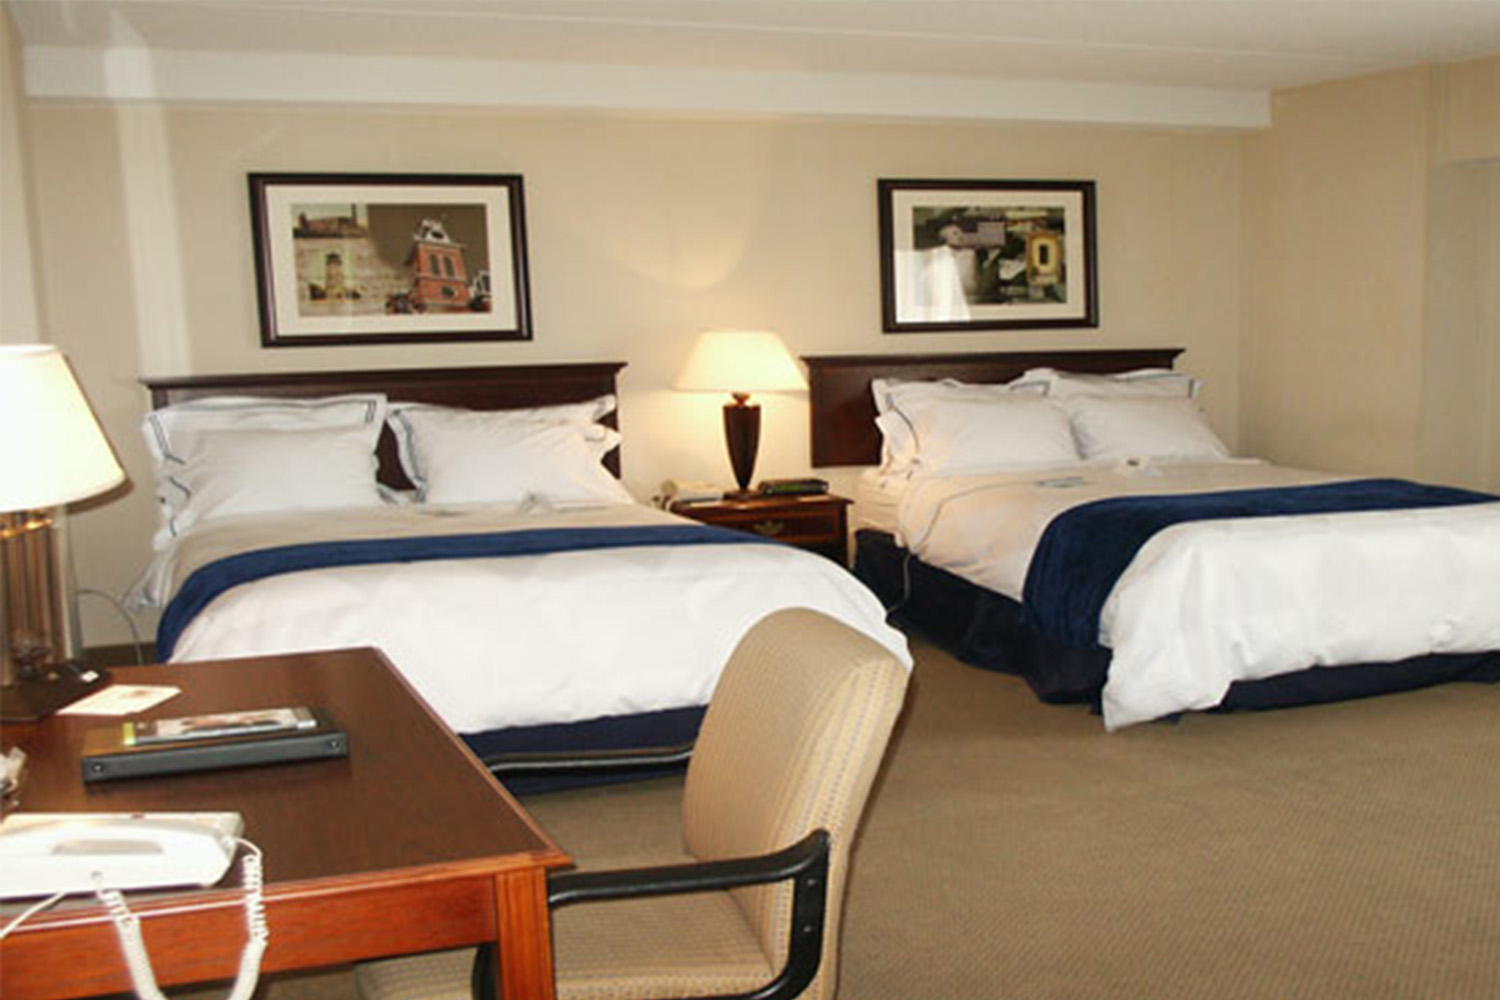 hotel room with two beds, with a photo mounted above each wall 